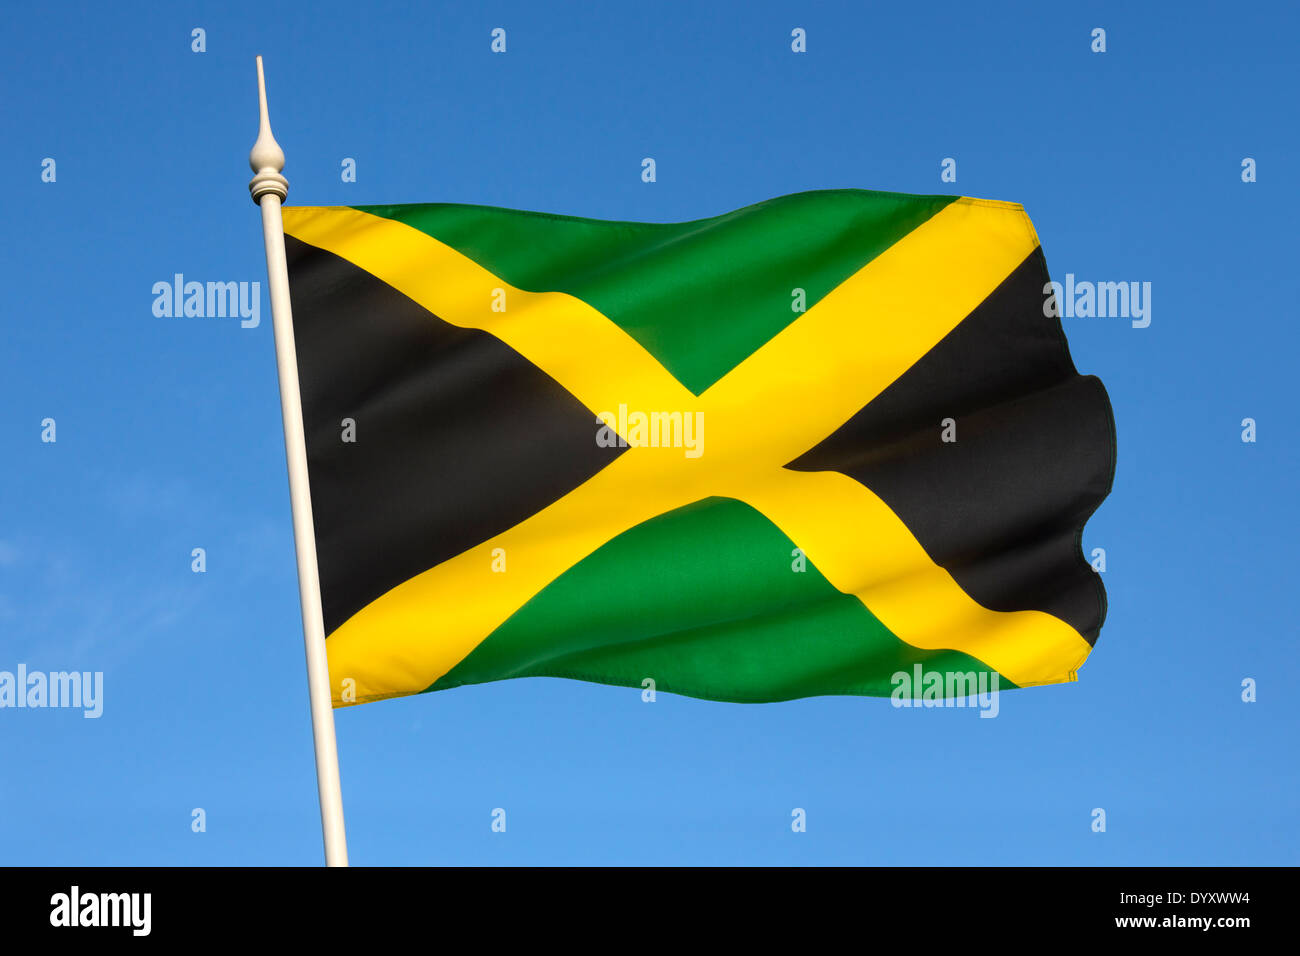 The national flag of Jamaica Stock Photo